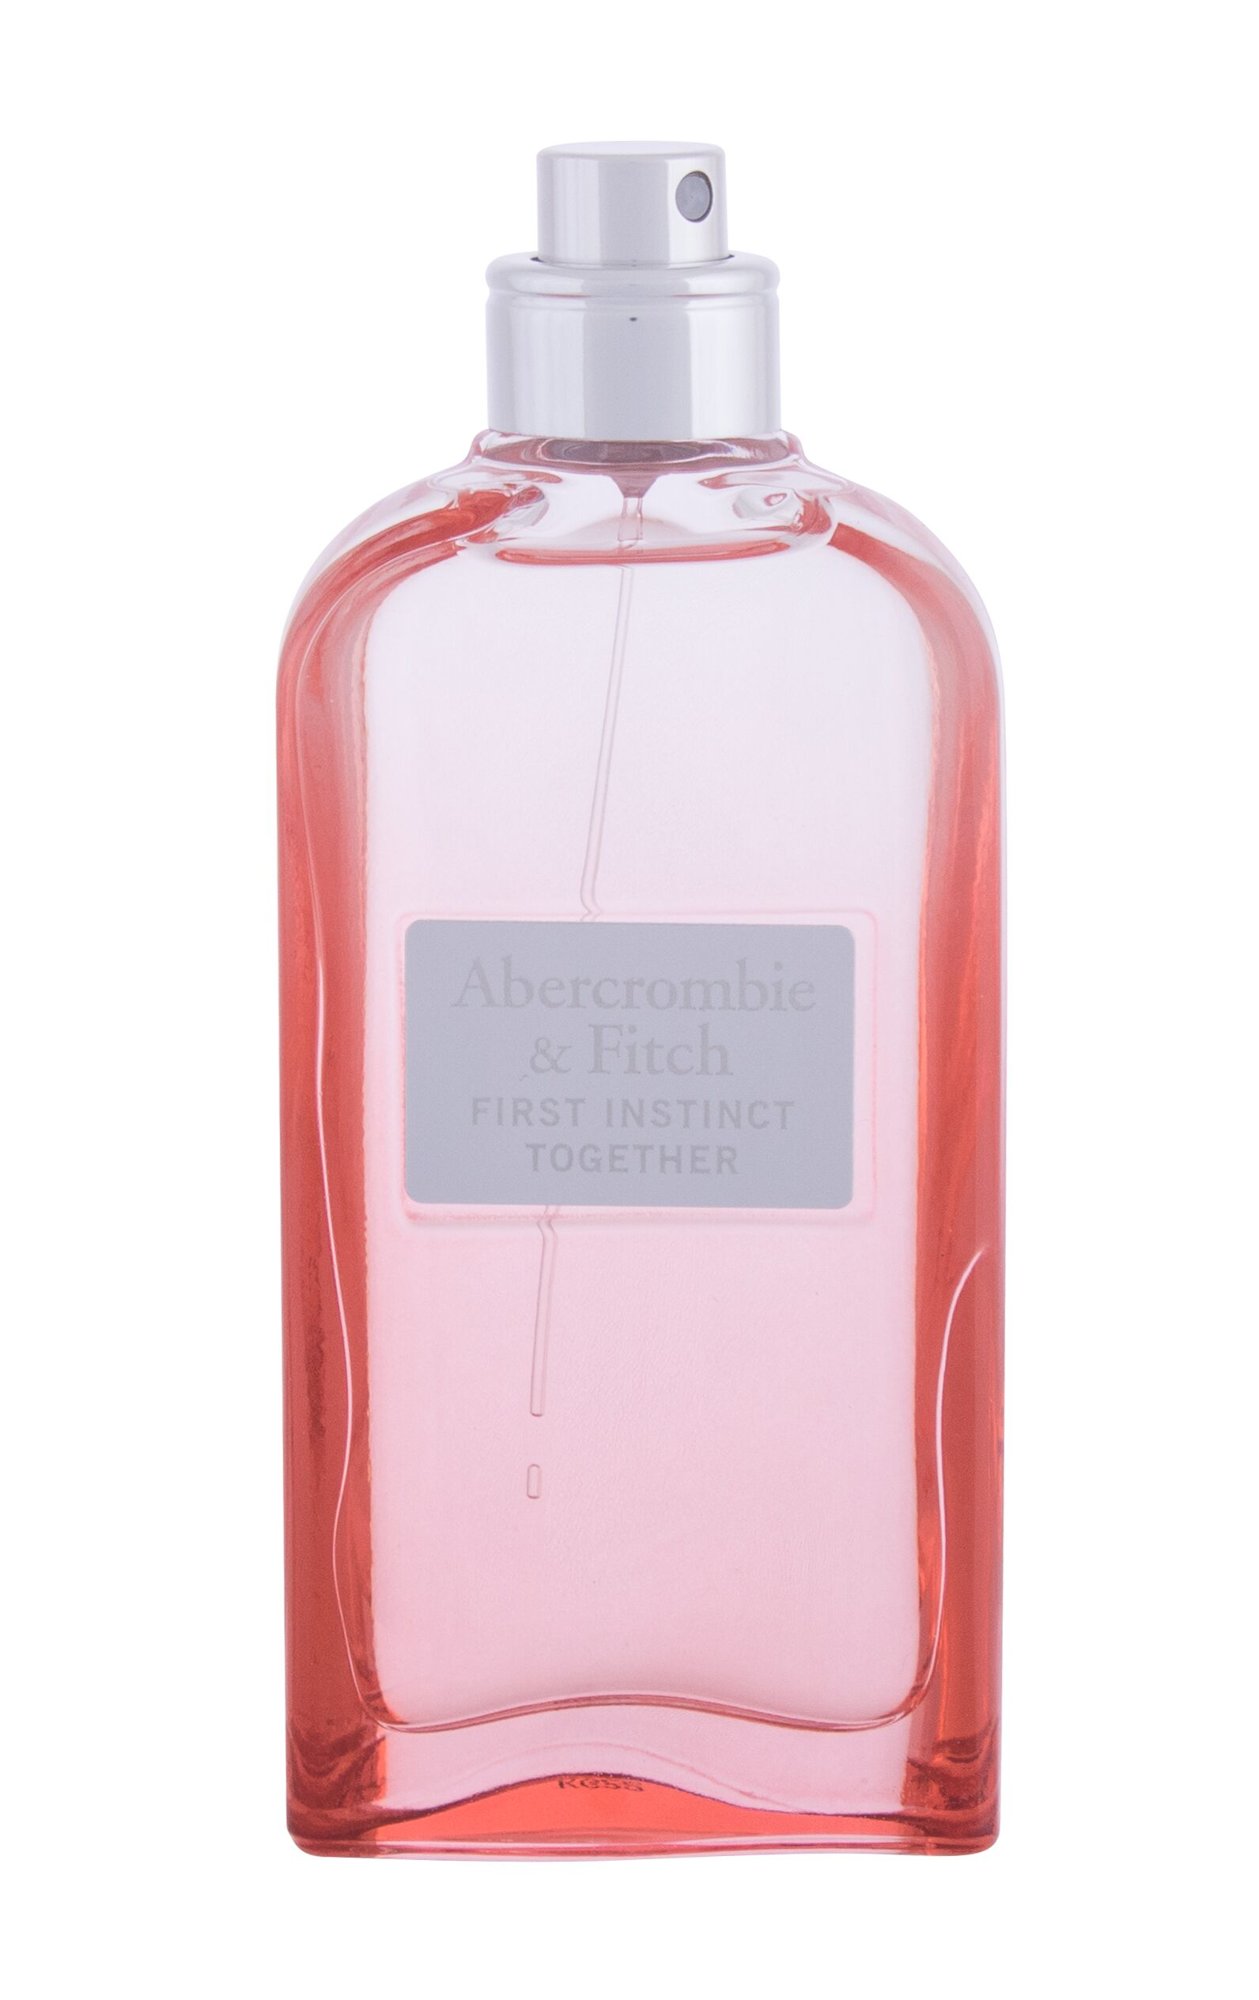 Abercrombie & Fitch First Instinct Together 50ml Kvepalai Moterims EDP Testeris